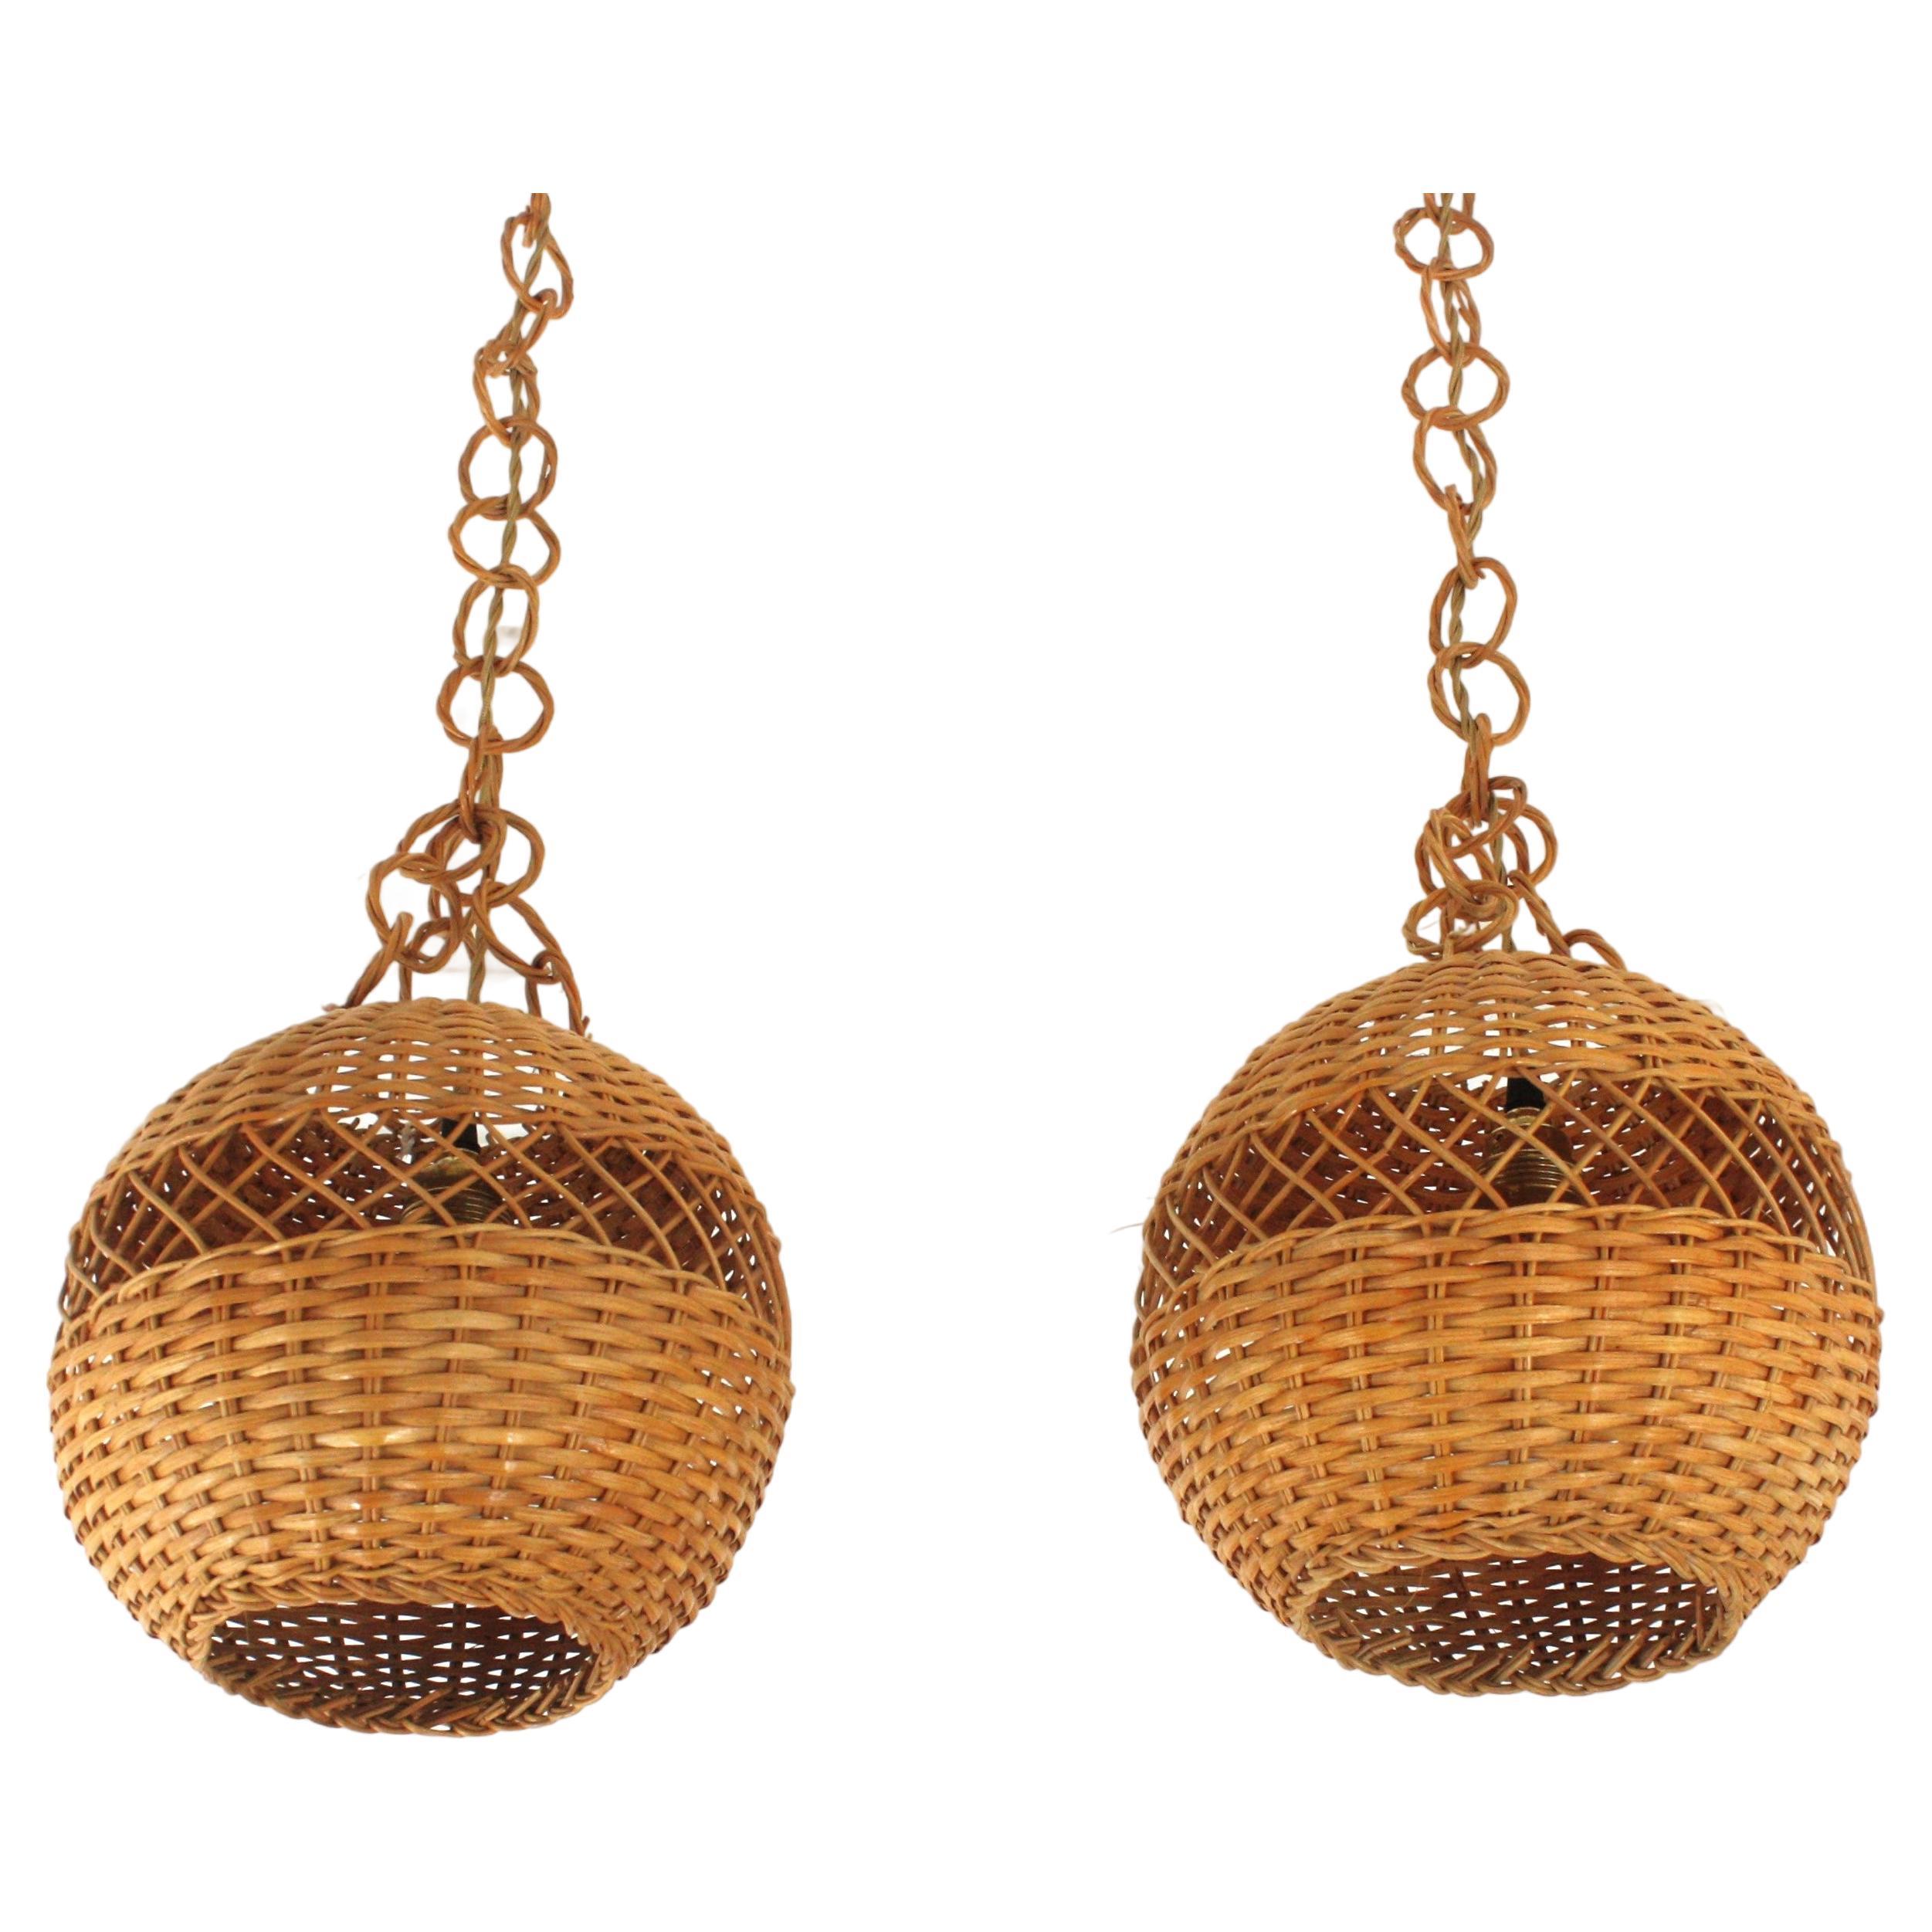 Pair of Handwoven Wicker Globe Pendant Lights or Lanterns For Sale